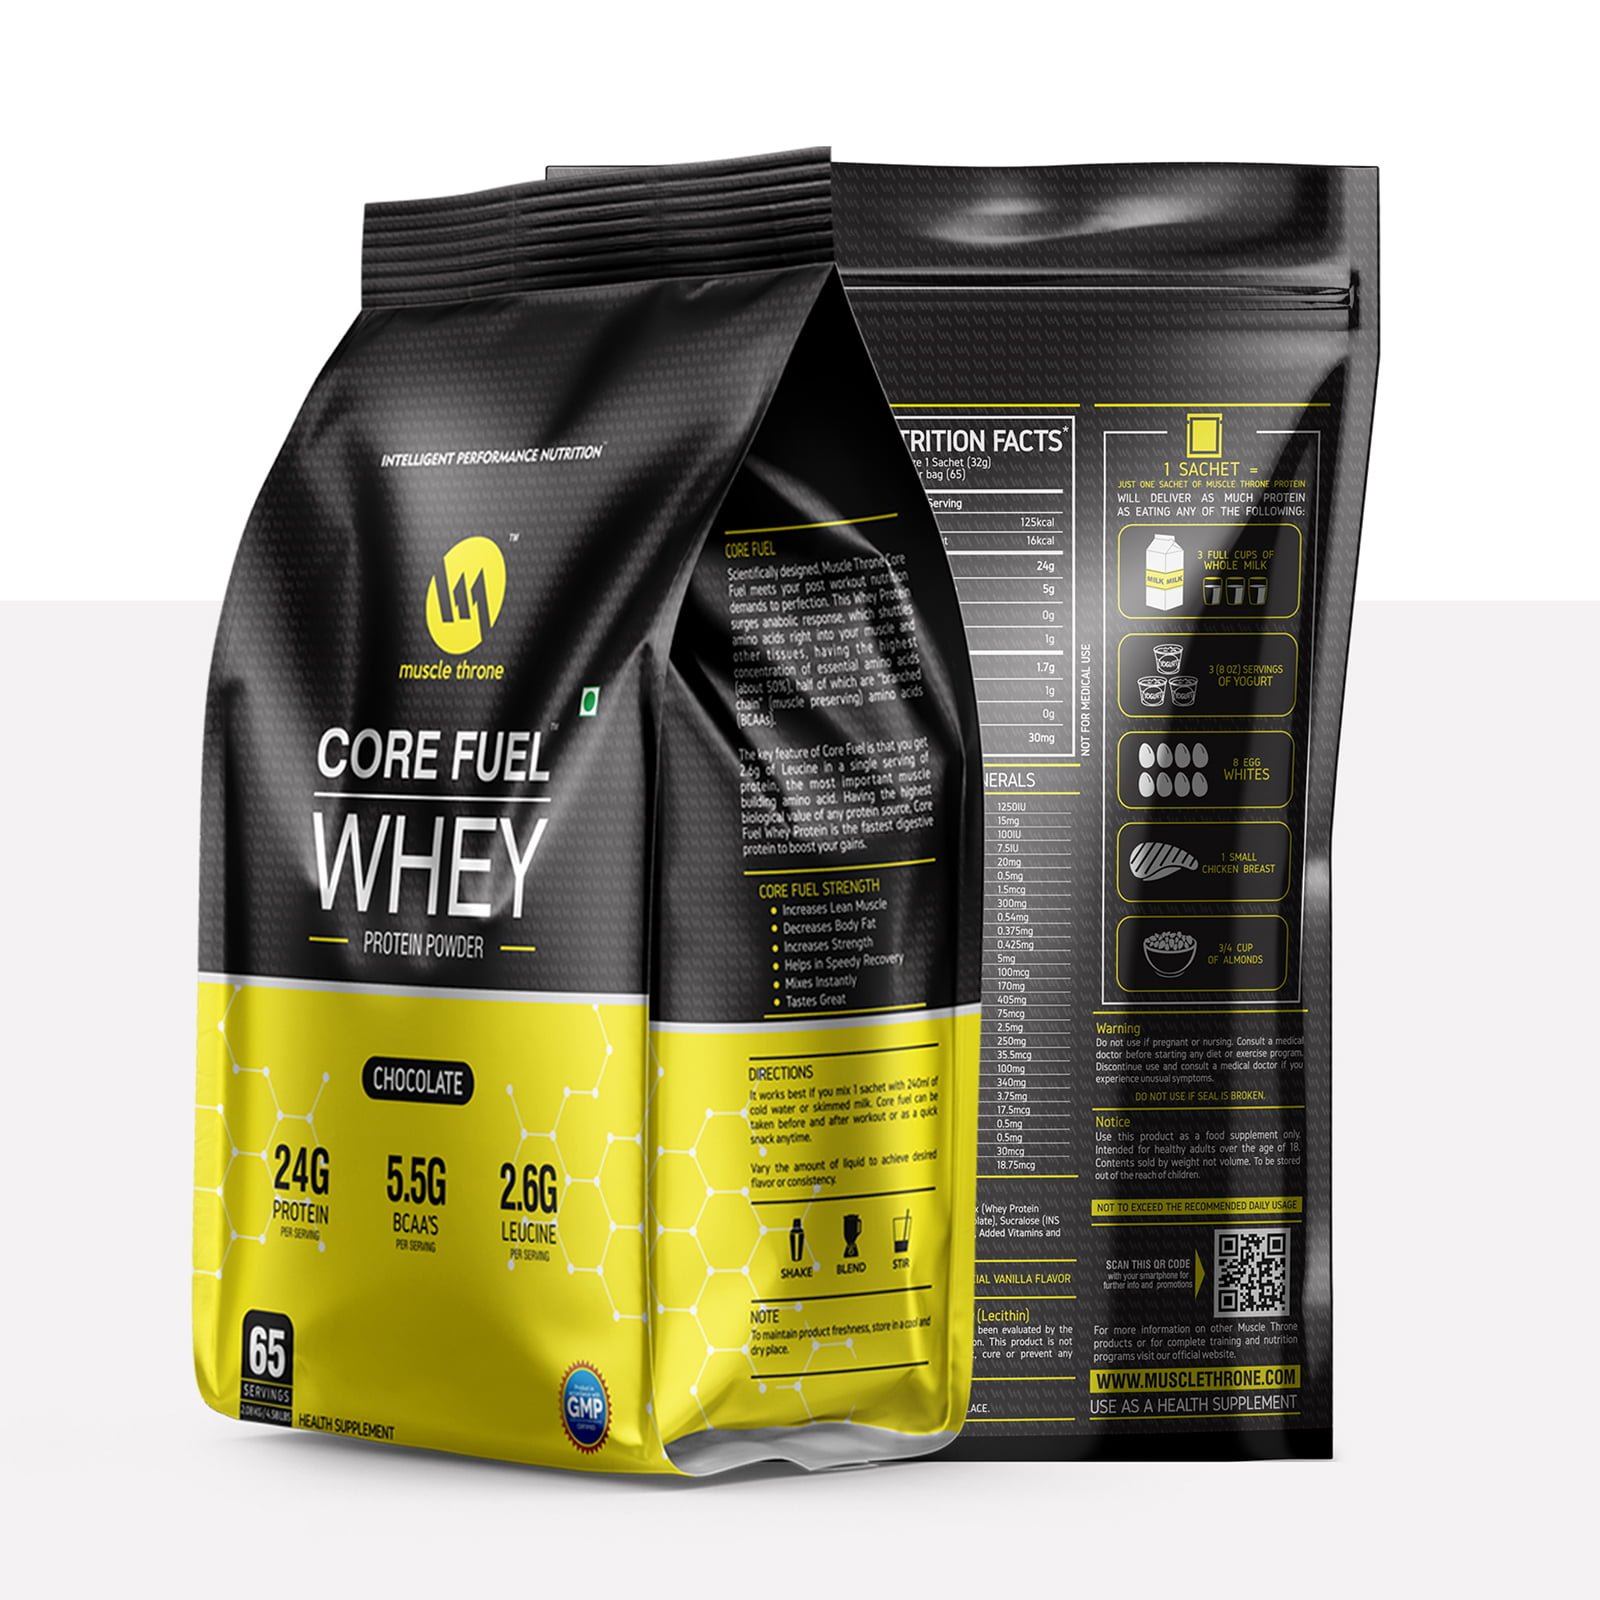 muscle throne core fuel whey